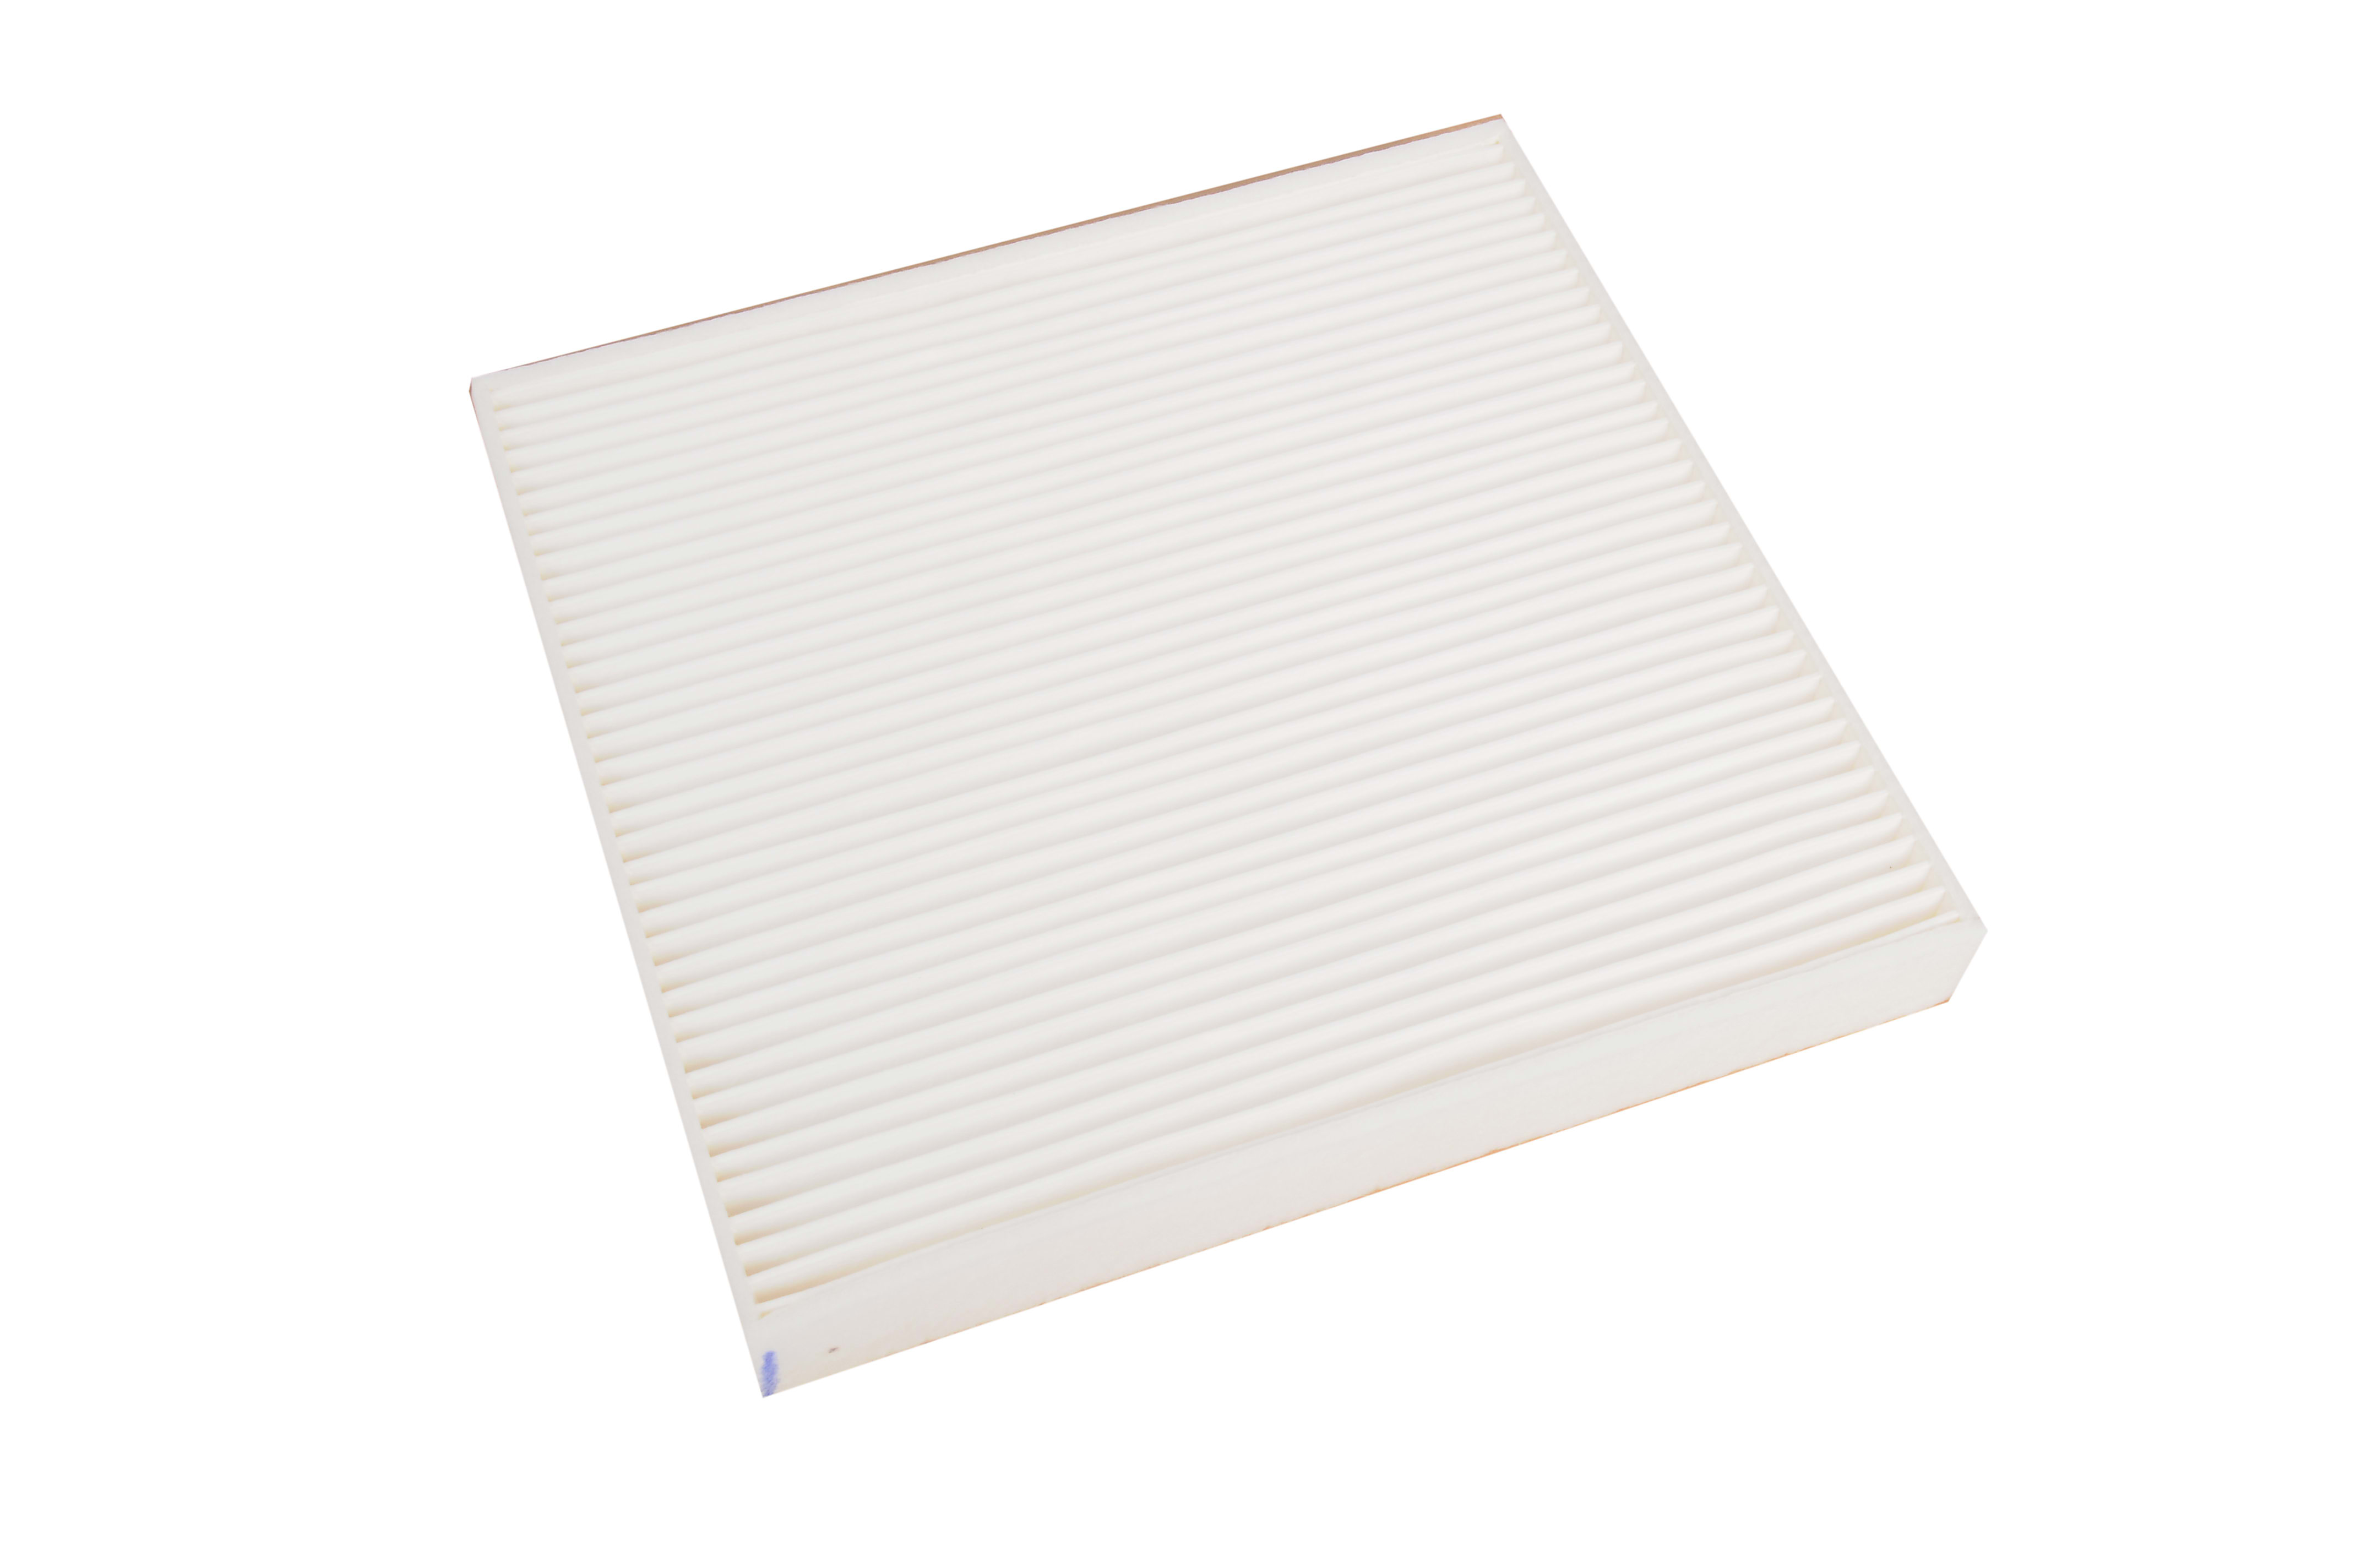 2016 GMC Sierra 3500 HD Cabin Air Filters from $19 | CarParts.com 2016 Gmc Sierra Denali Cabin Air Filter